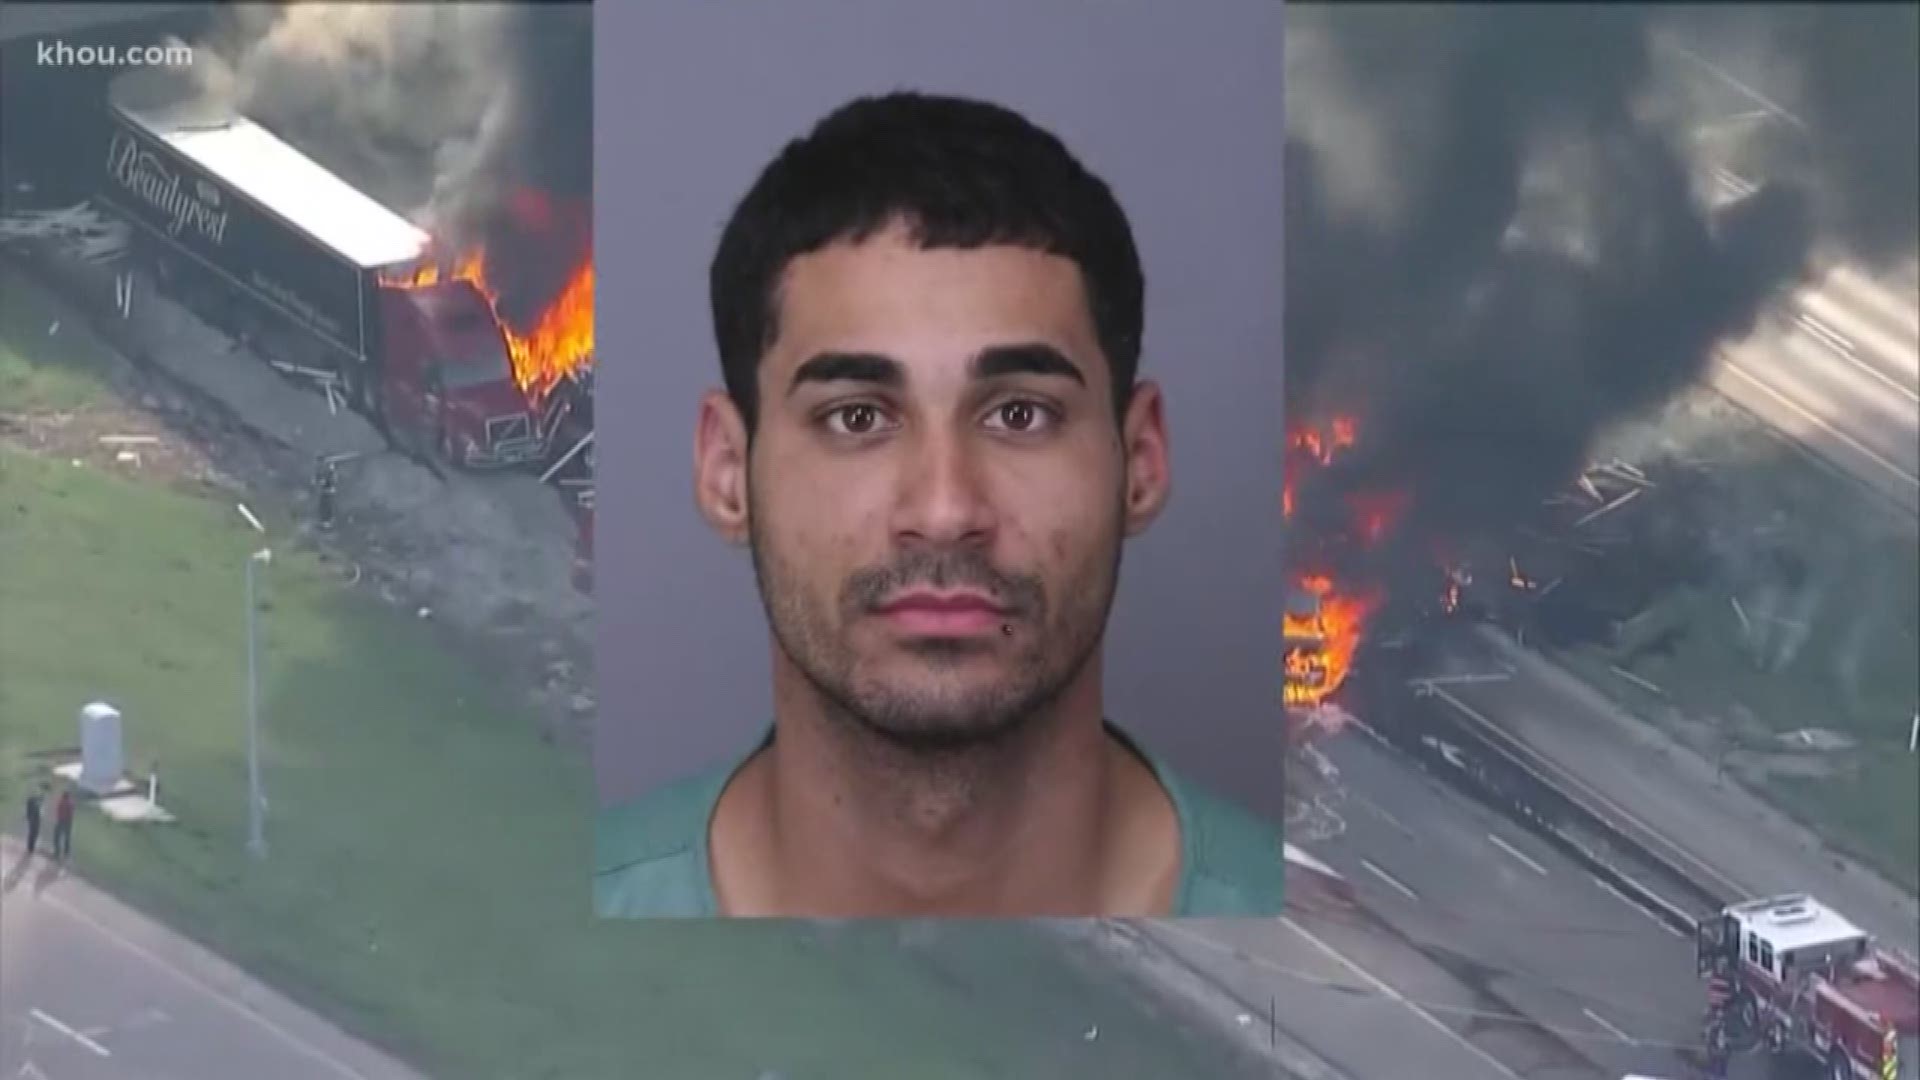 Rogel Lazaro Aguilera Mederos, 23, has been charged with multiple counts of vehicular homicide in connection with the Thursday crash, which shut down Interstate 70 near Lakewood, Colorado, for hours while crews worked to extinguish the massive resulting fire.